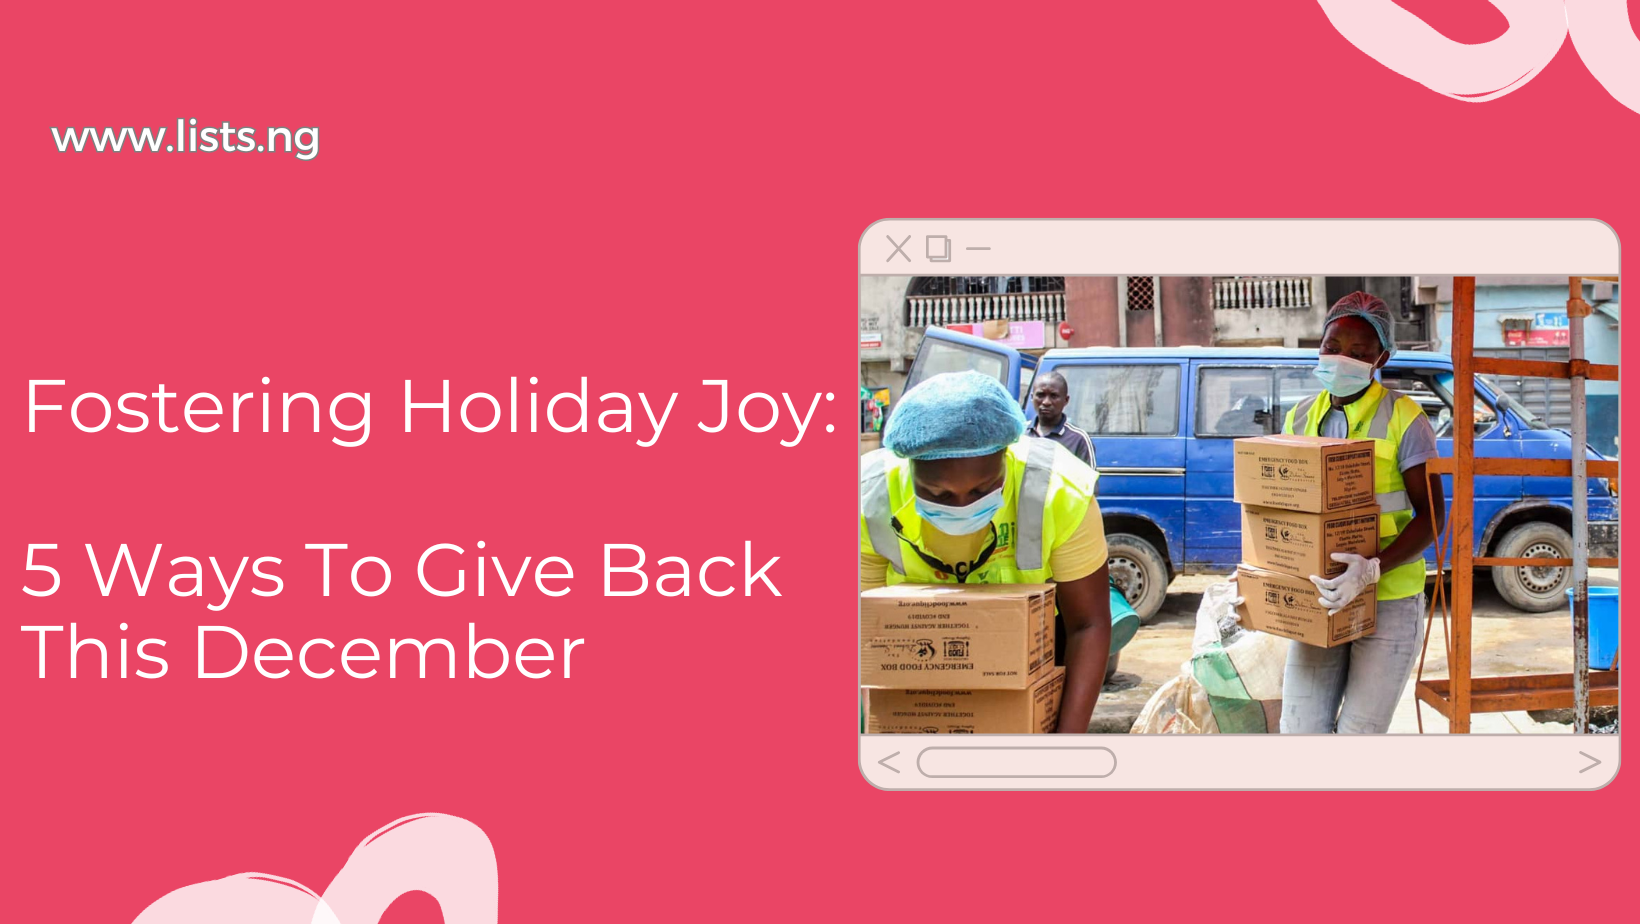 Fostering Holiday Joy: 5 Ways To Give Back This December